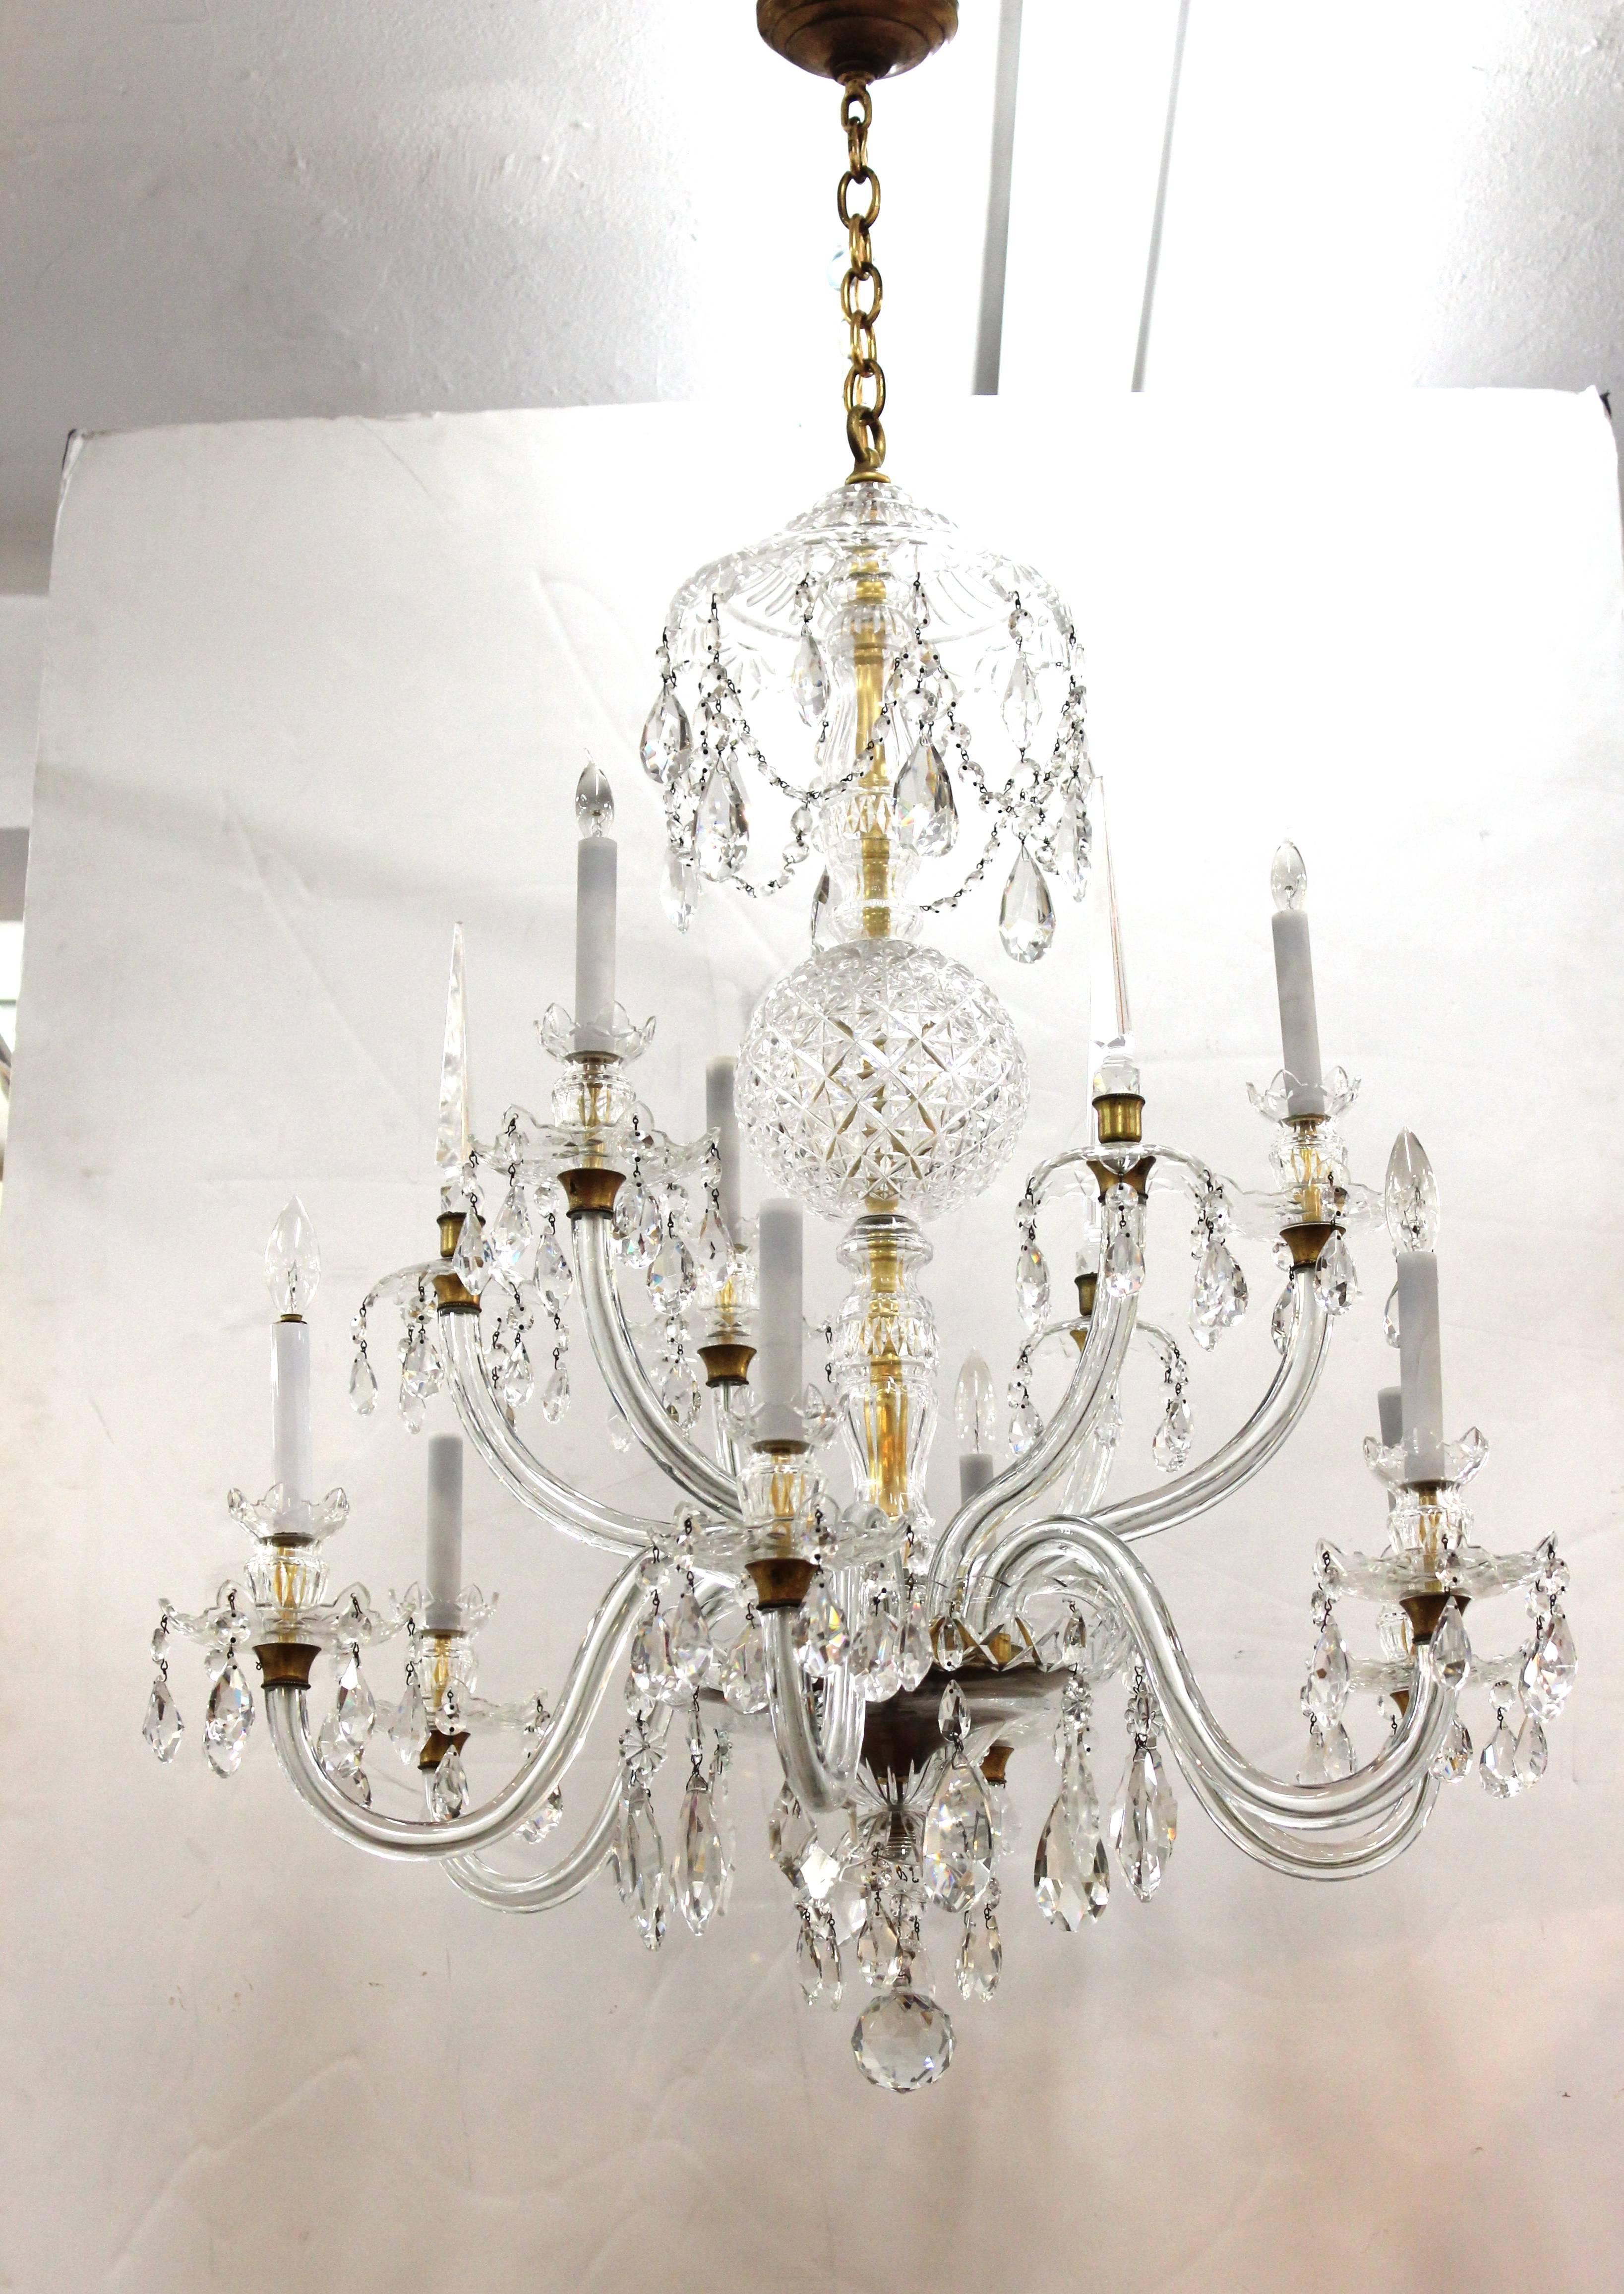 Crystal chandelier by Waterford. Features cut crystal sphere and multiple scrolled crystal arms with faux candle sockets. Cascading crystal drops and beads dangle from each part of the chandelier. Wear consistent with age and use. The piece is in